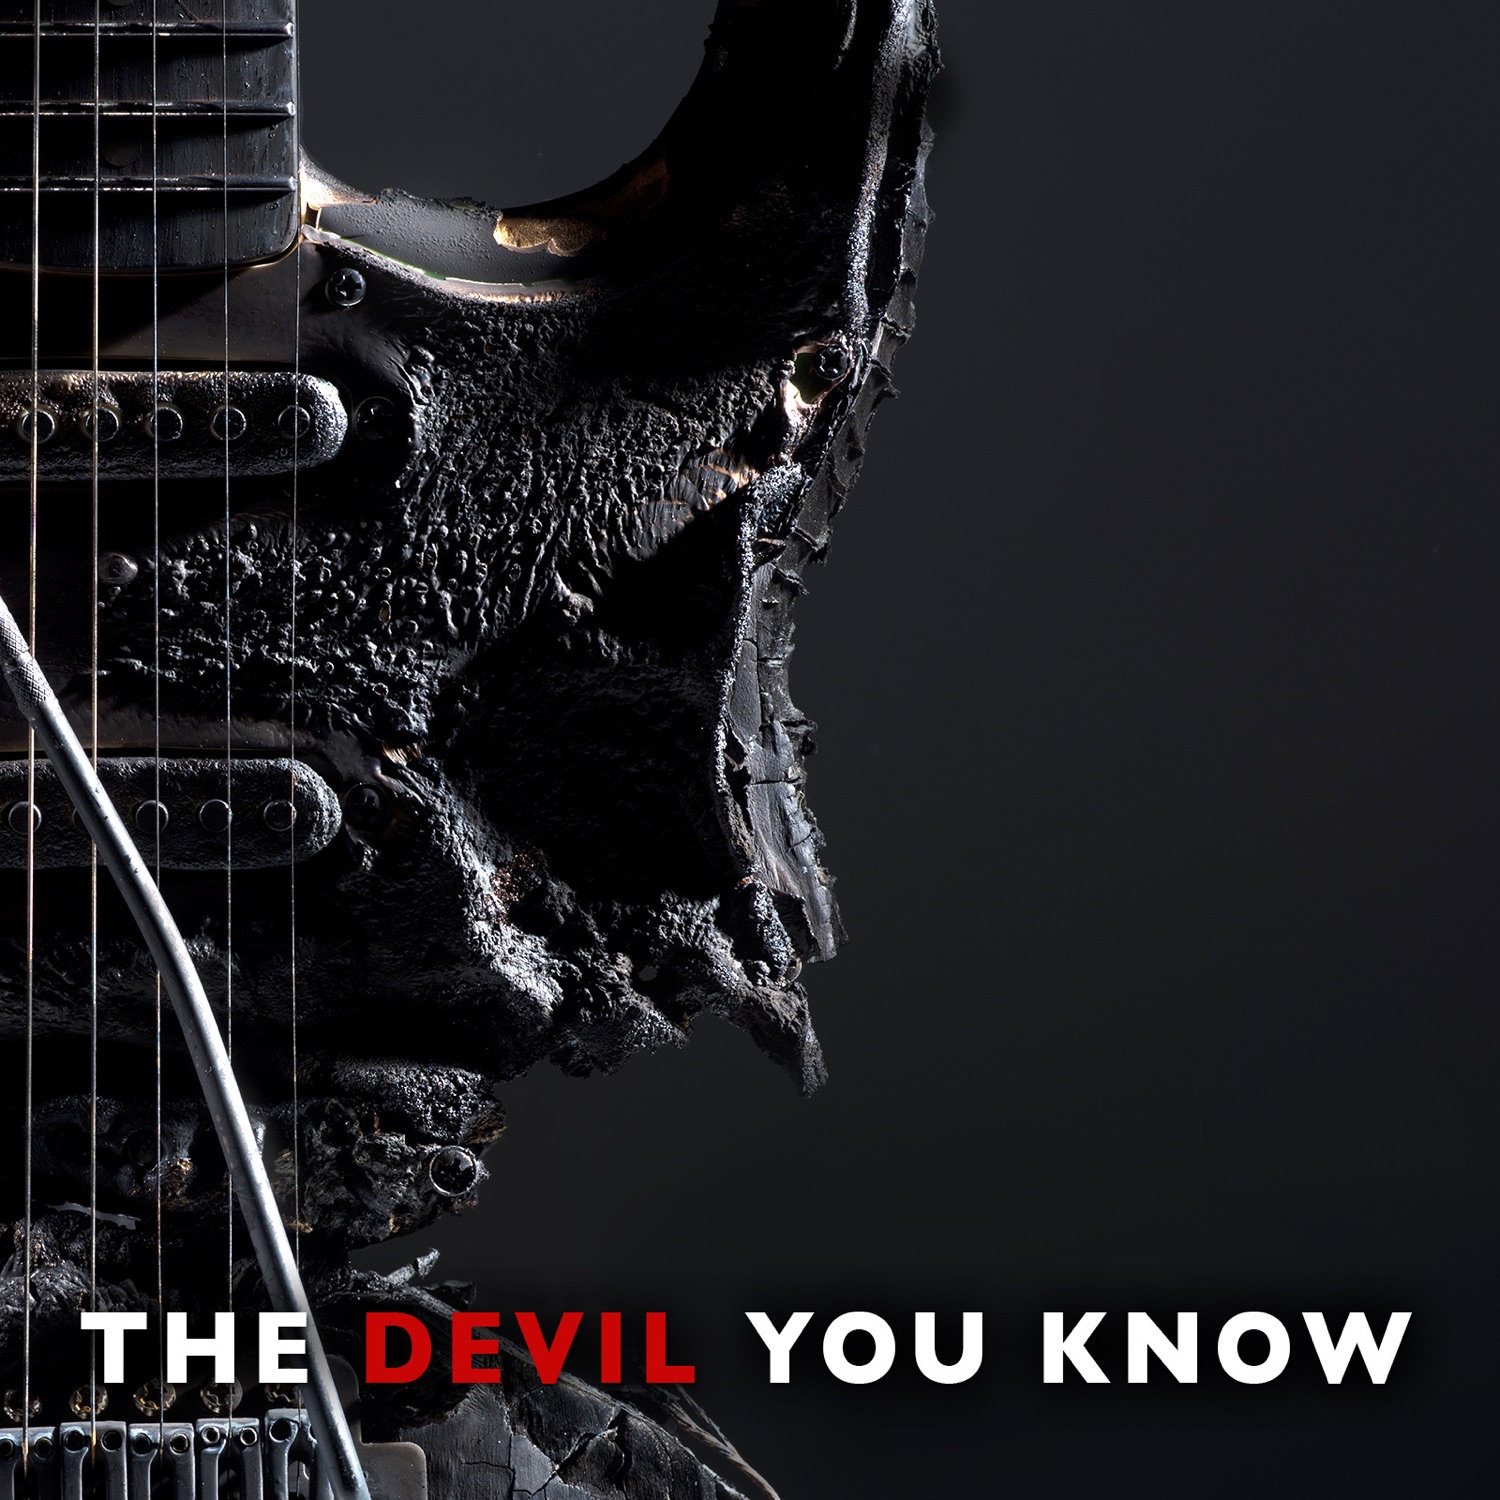 Art for The Devil You Know by  Blues Saraceno